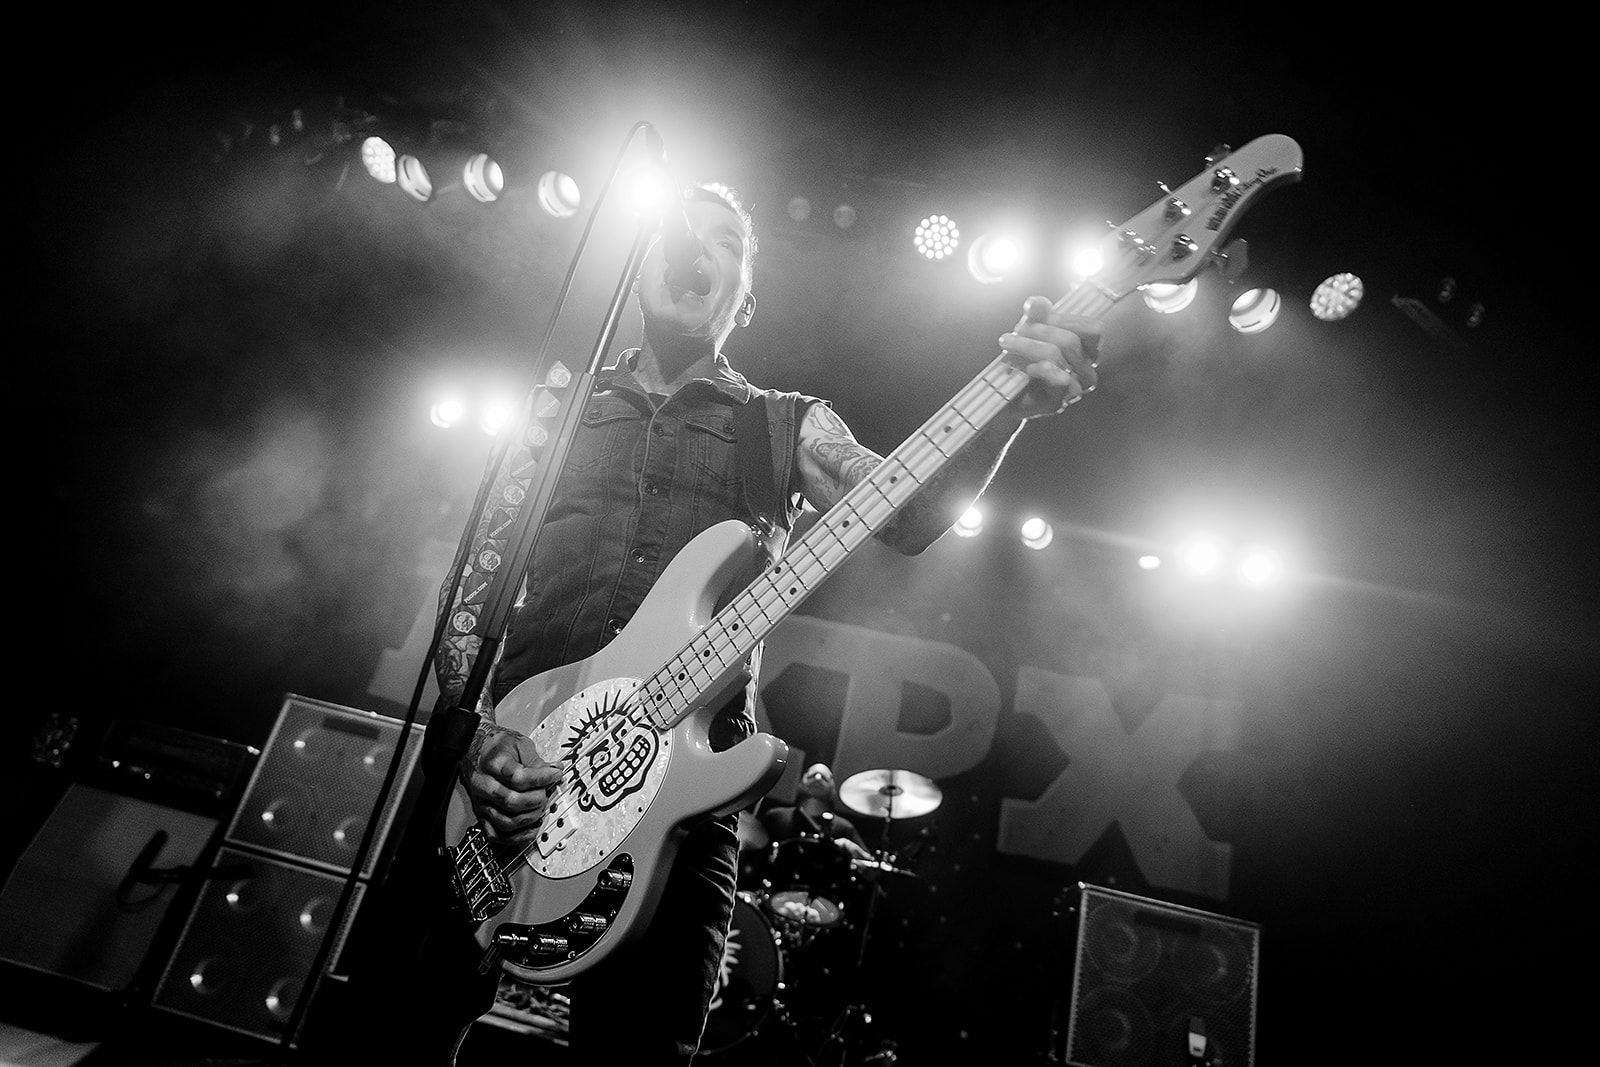 MxPx plays a sold out show at the Showbox in Seattle